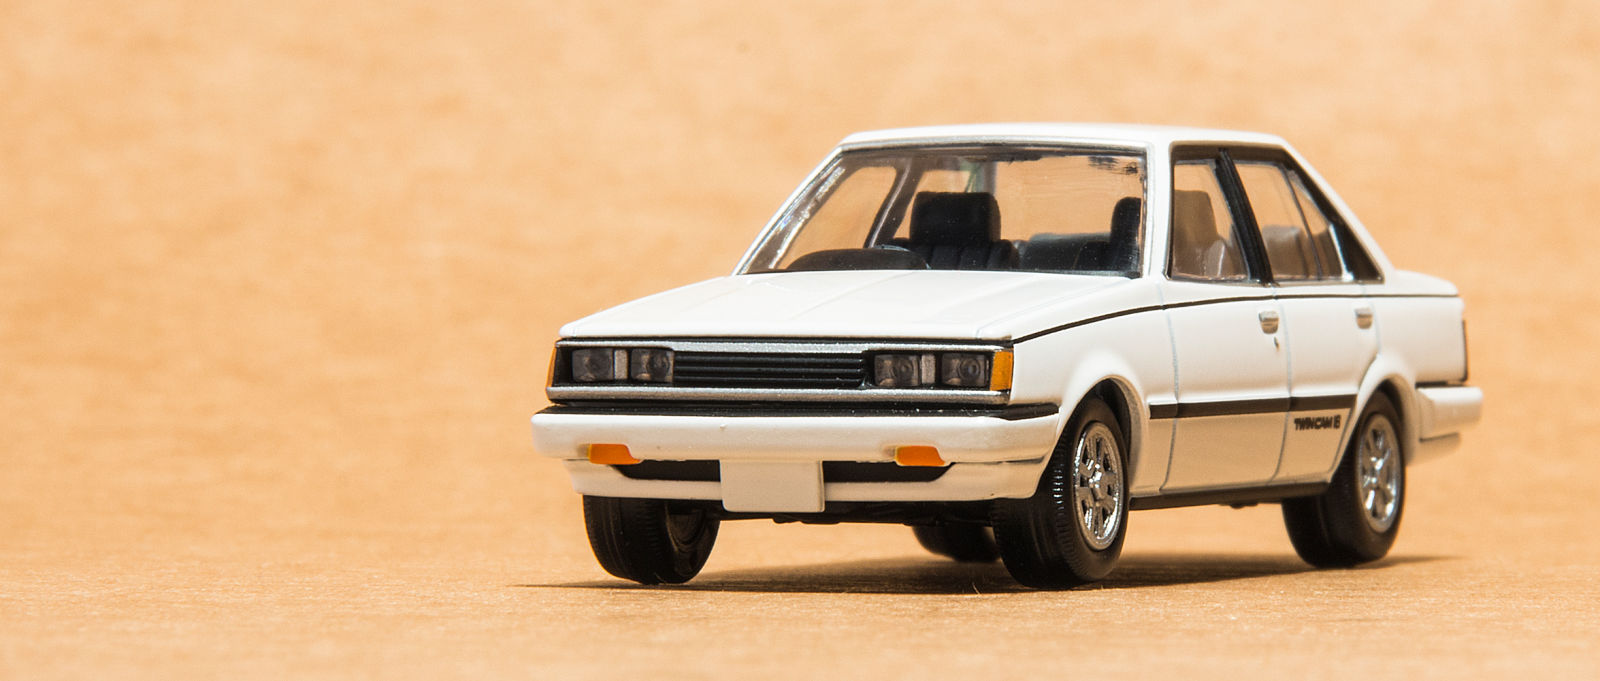 Illustration for article titled Review: TLV-N Toyota Carina 1600 GT-R